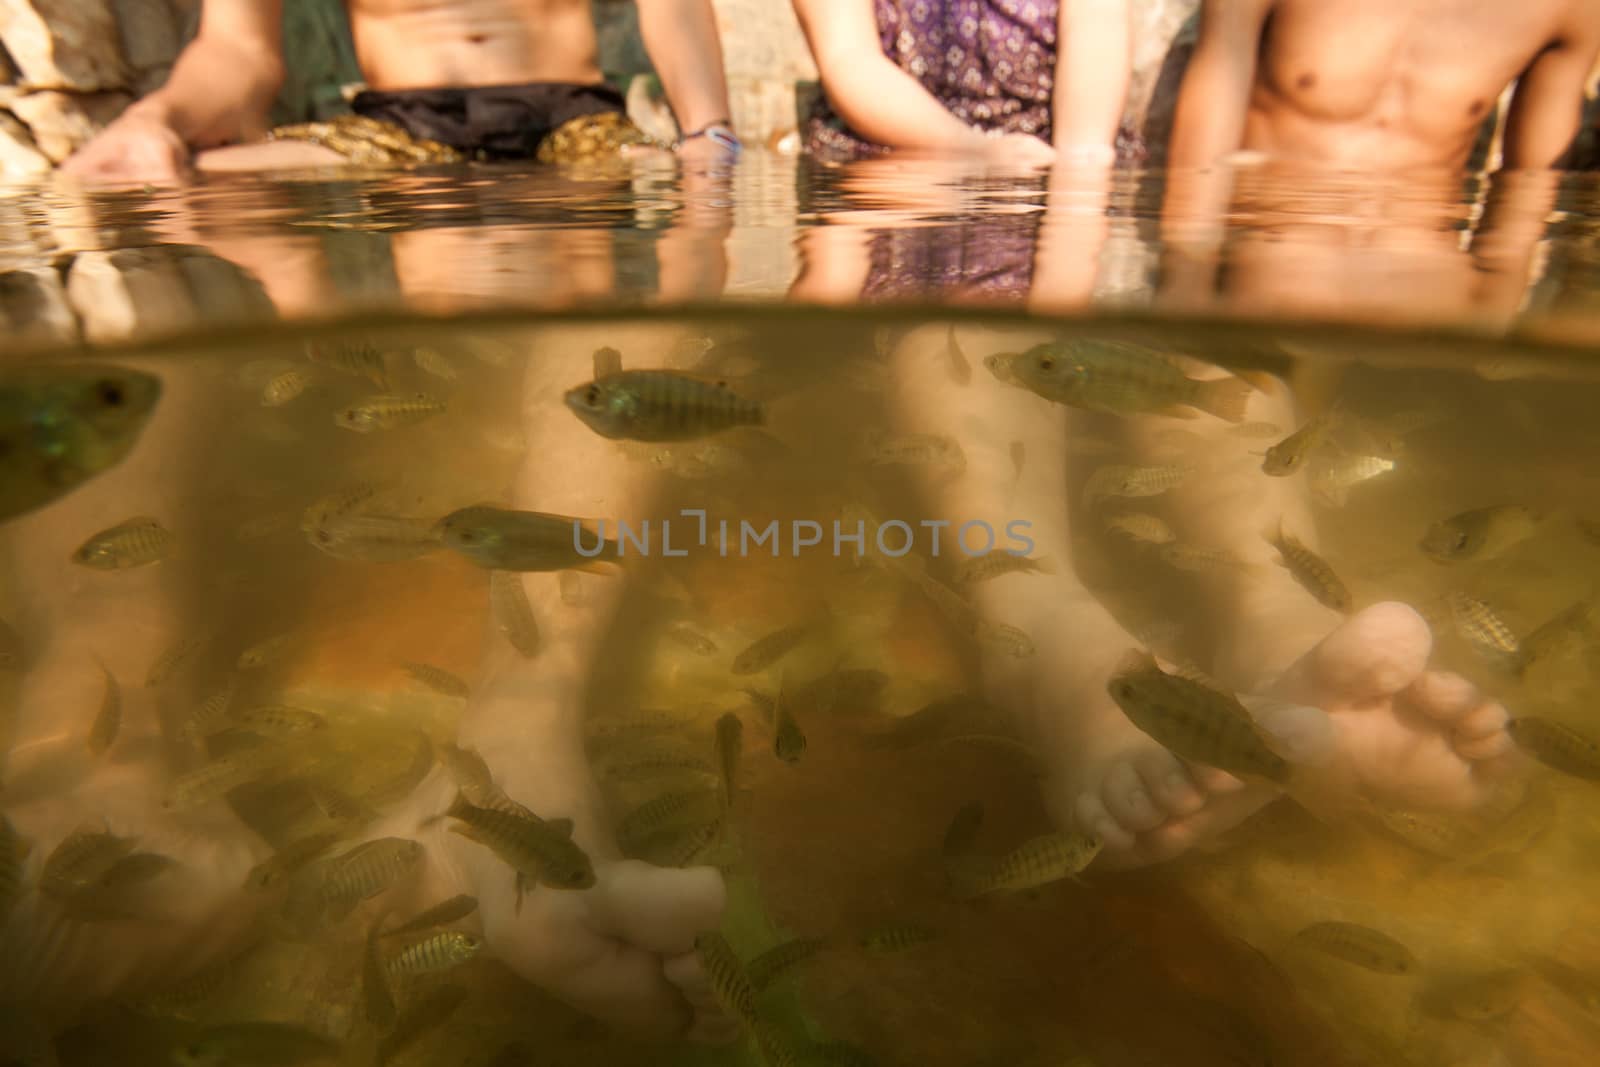 Fish spa feet pedicure skin care treatment by think4photop